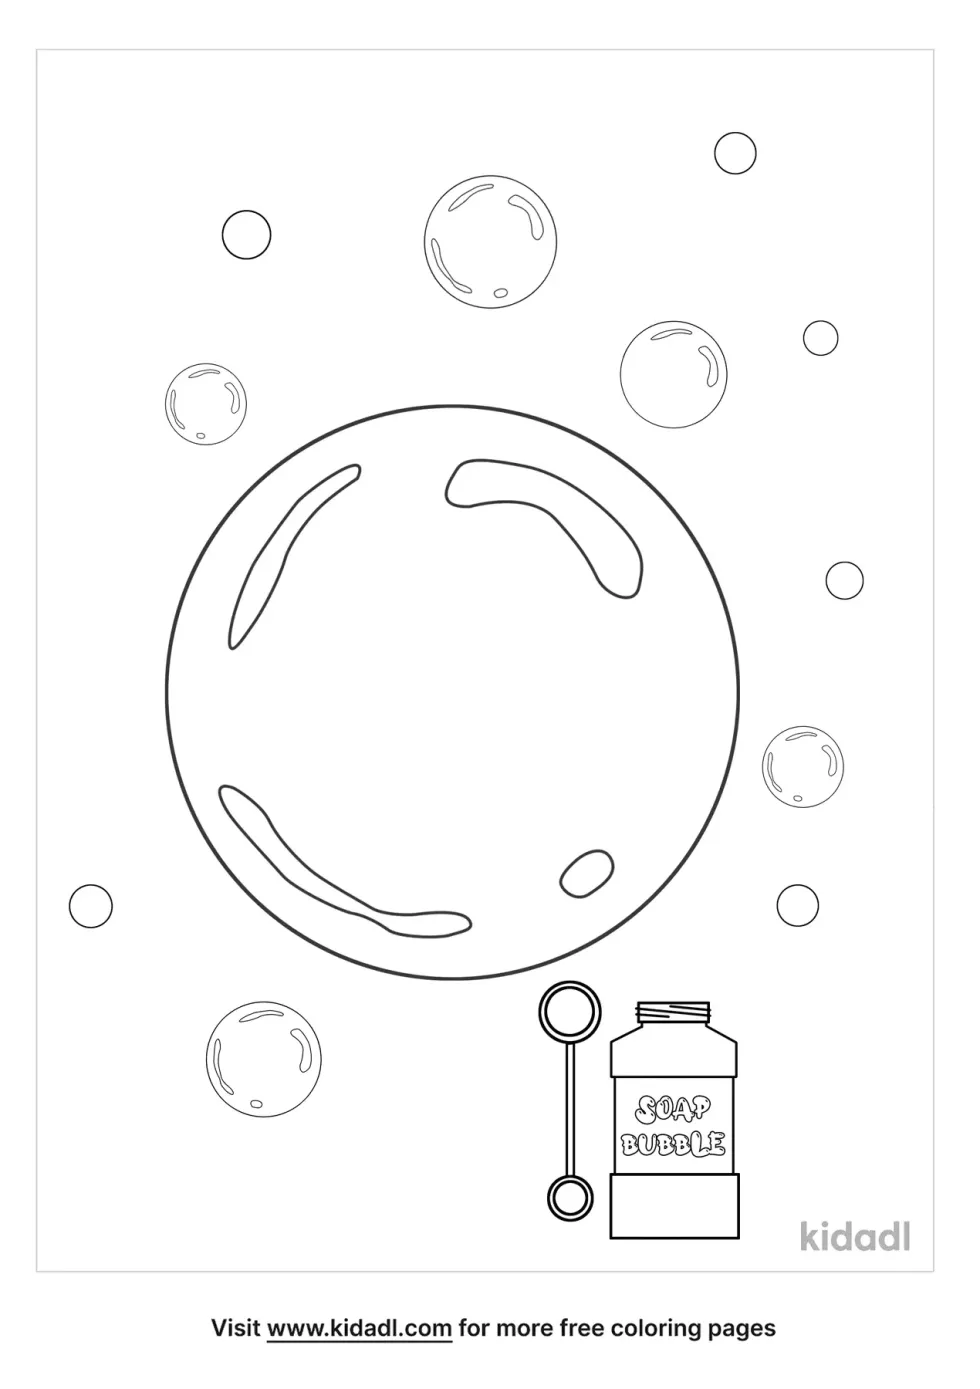 Giant Bubble Coloring Page